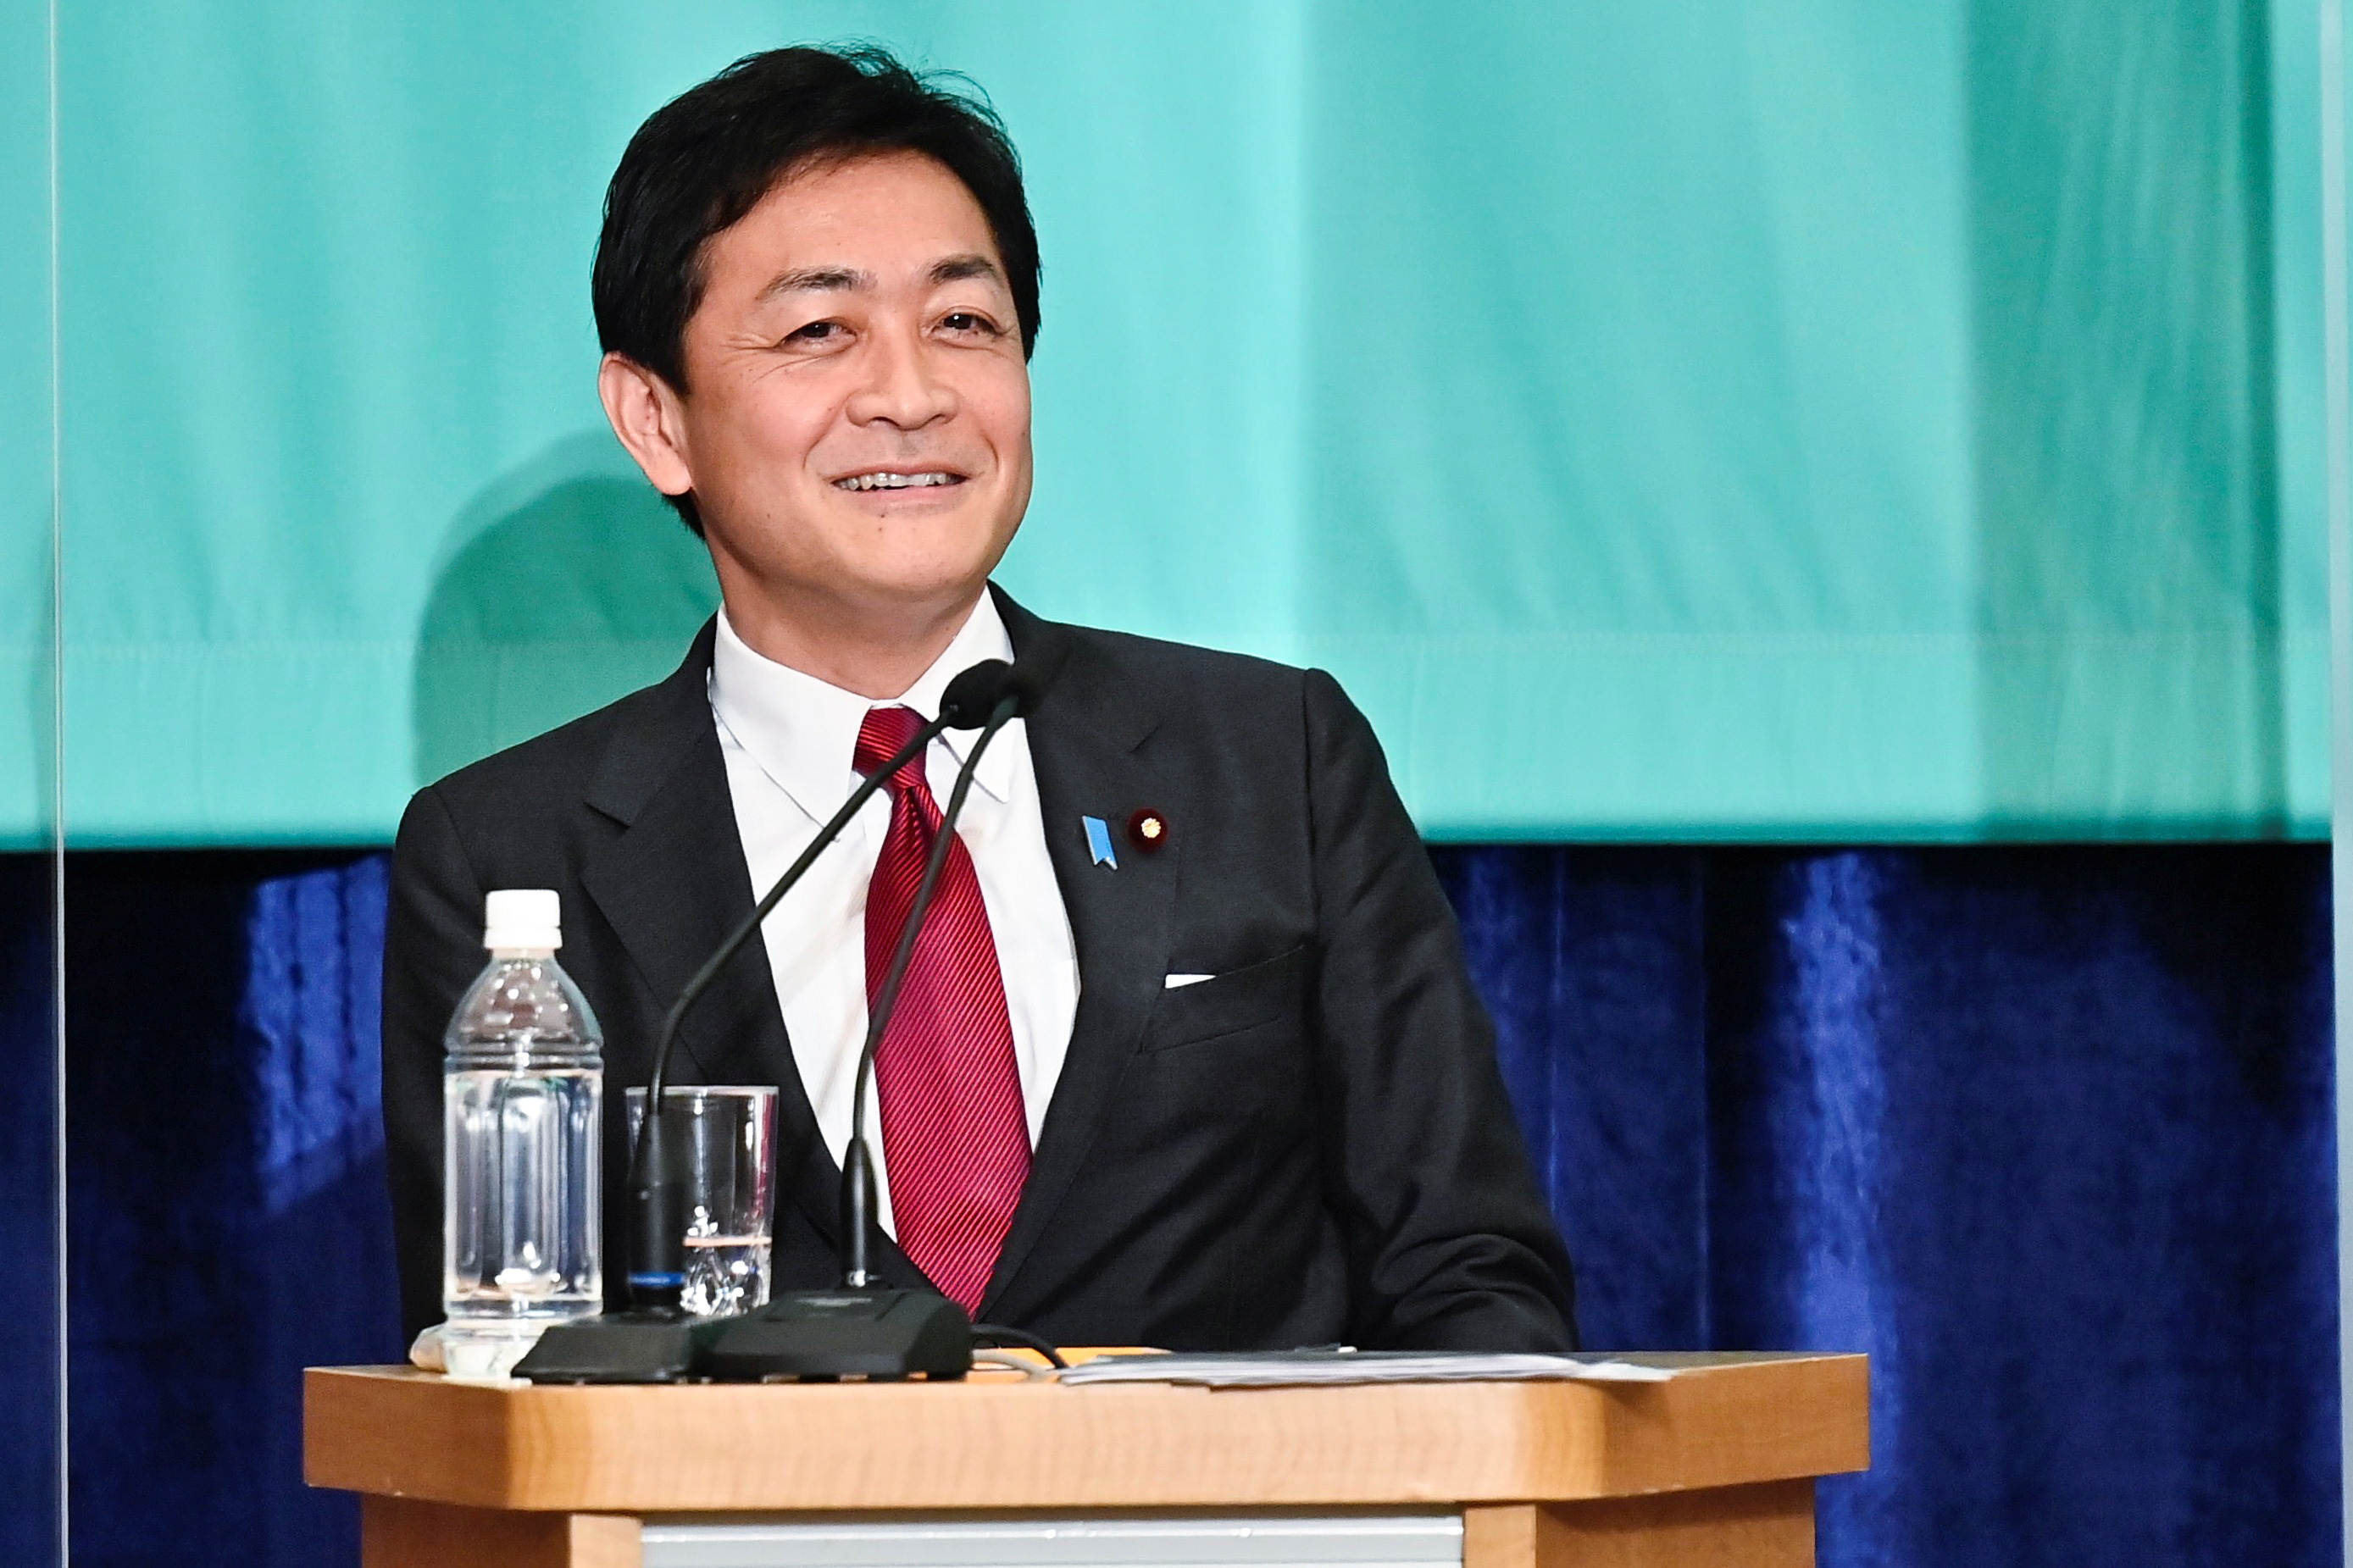 Party leaders debate ahead of the Upper House election in Japan